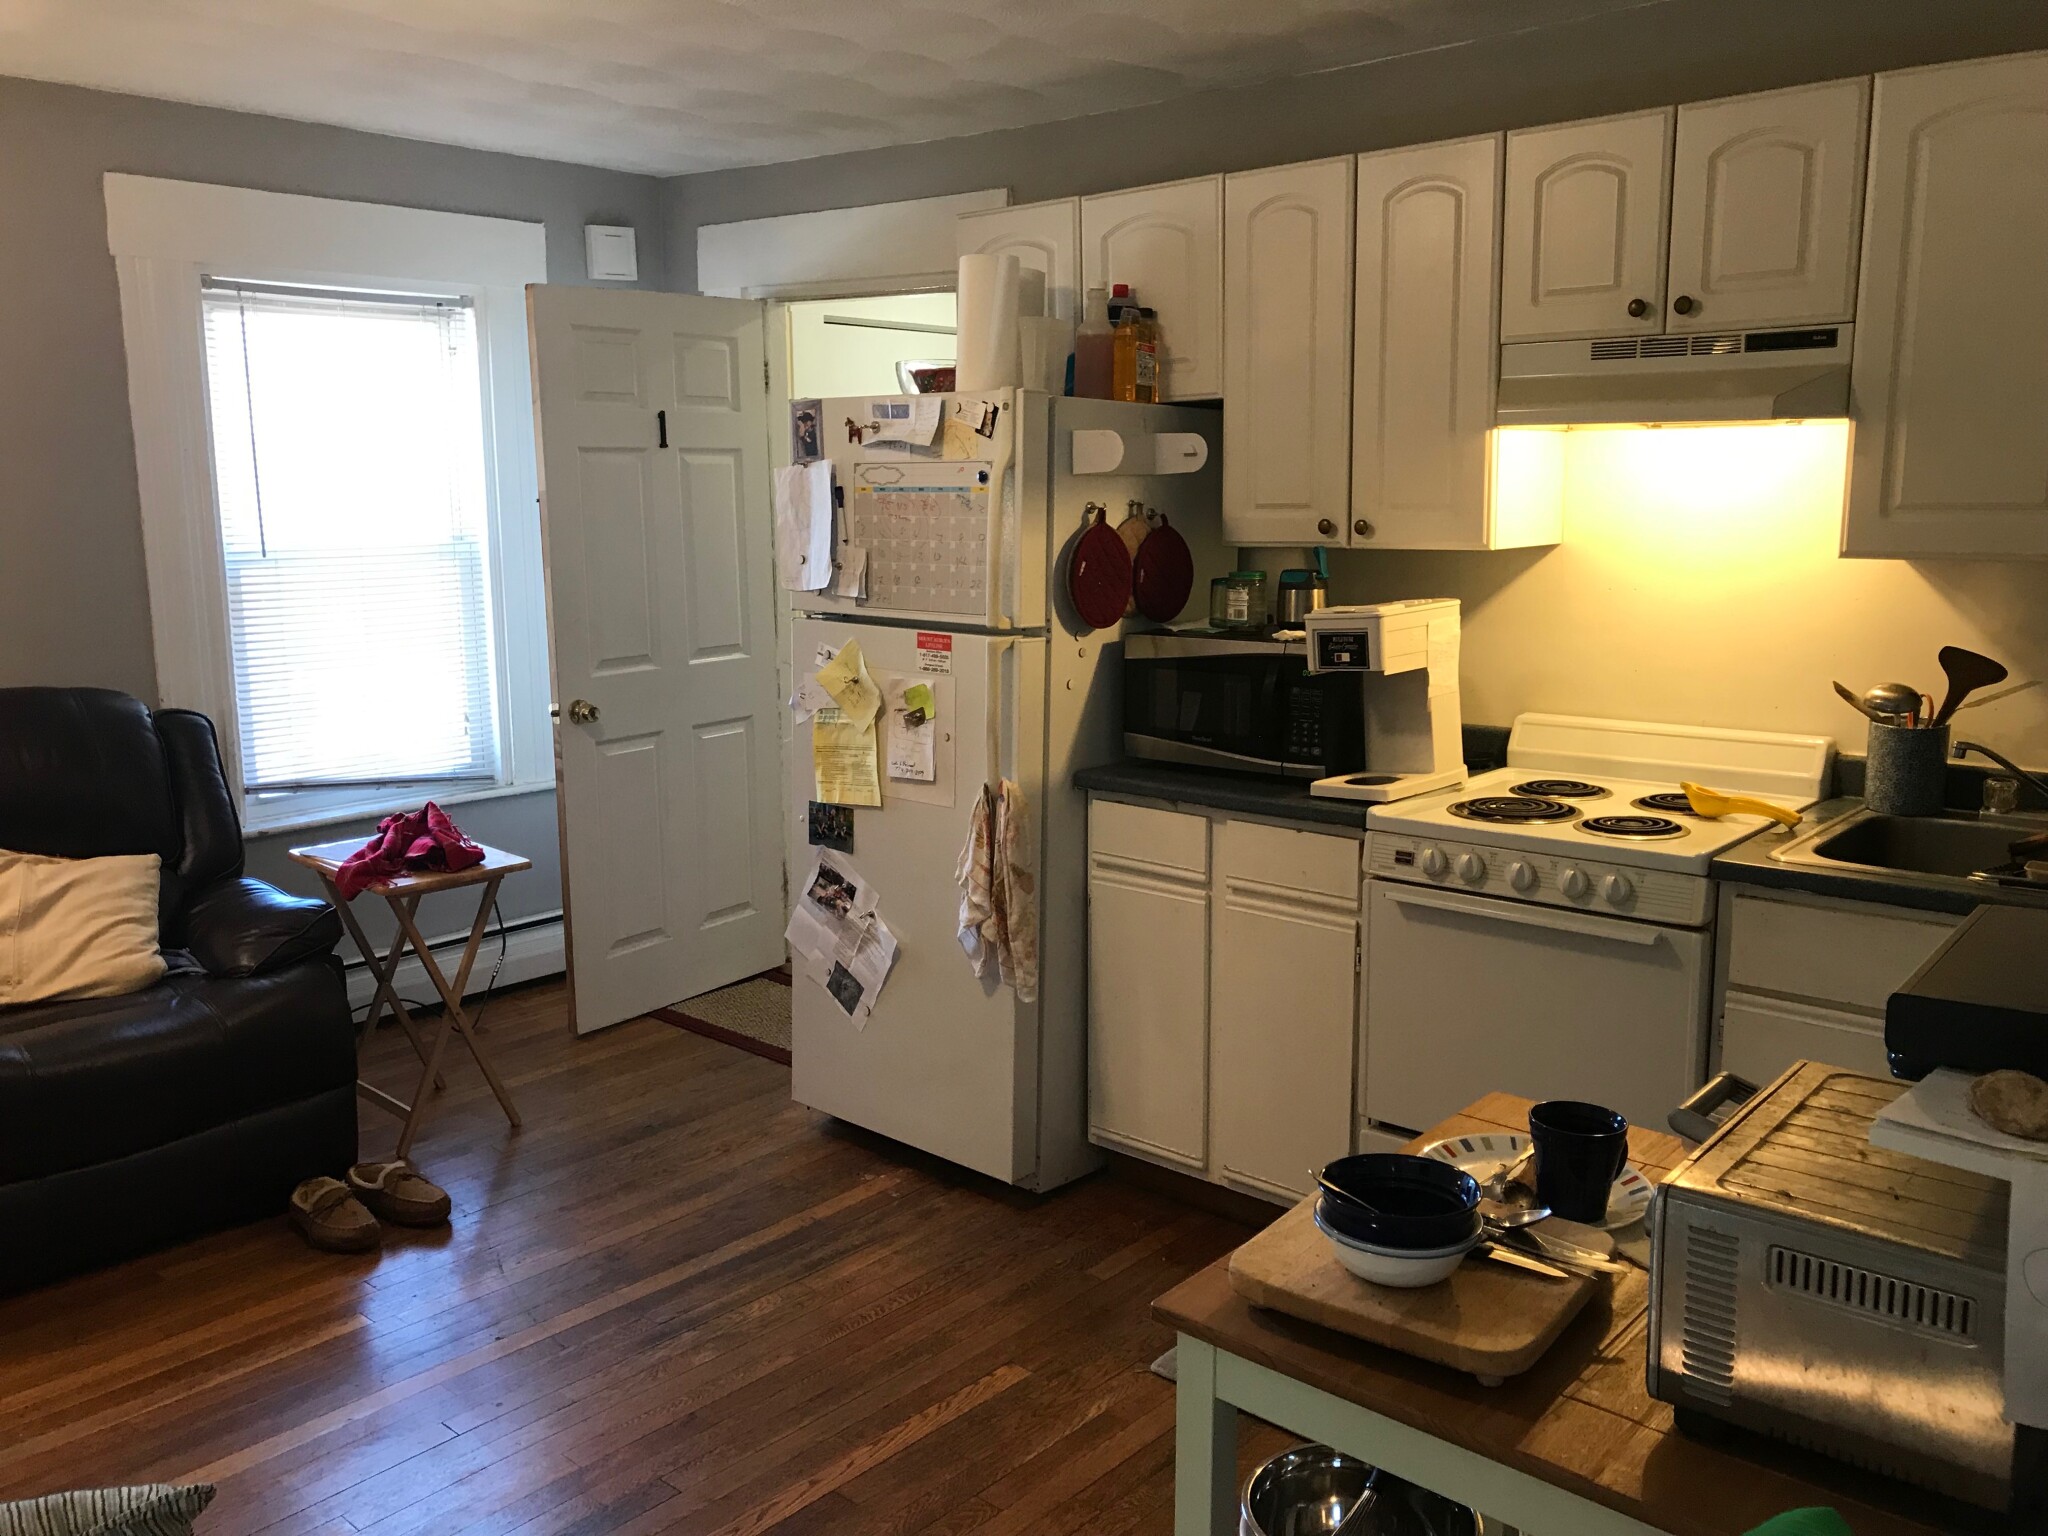 Photos of apartment on Somerville Ave.,Somerville MA 02143